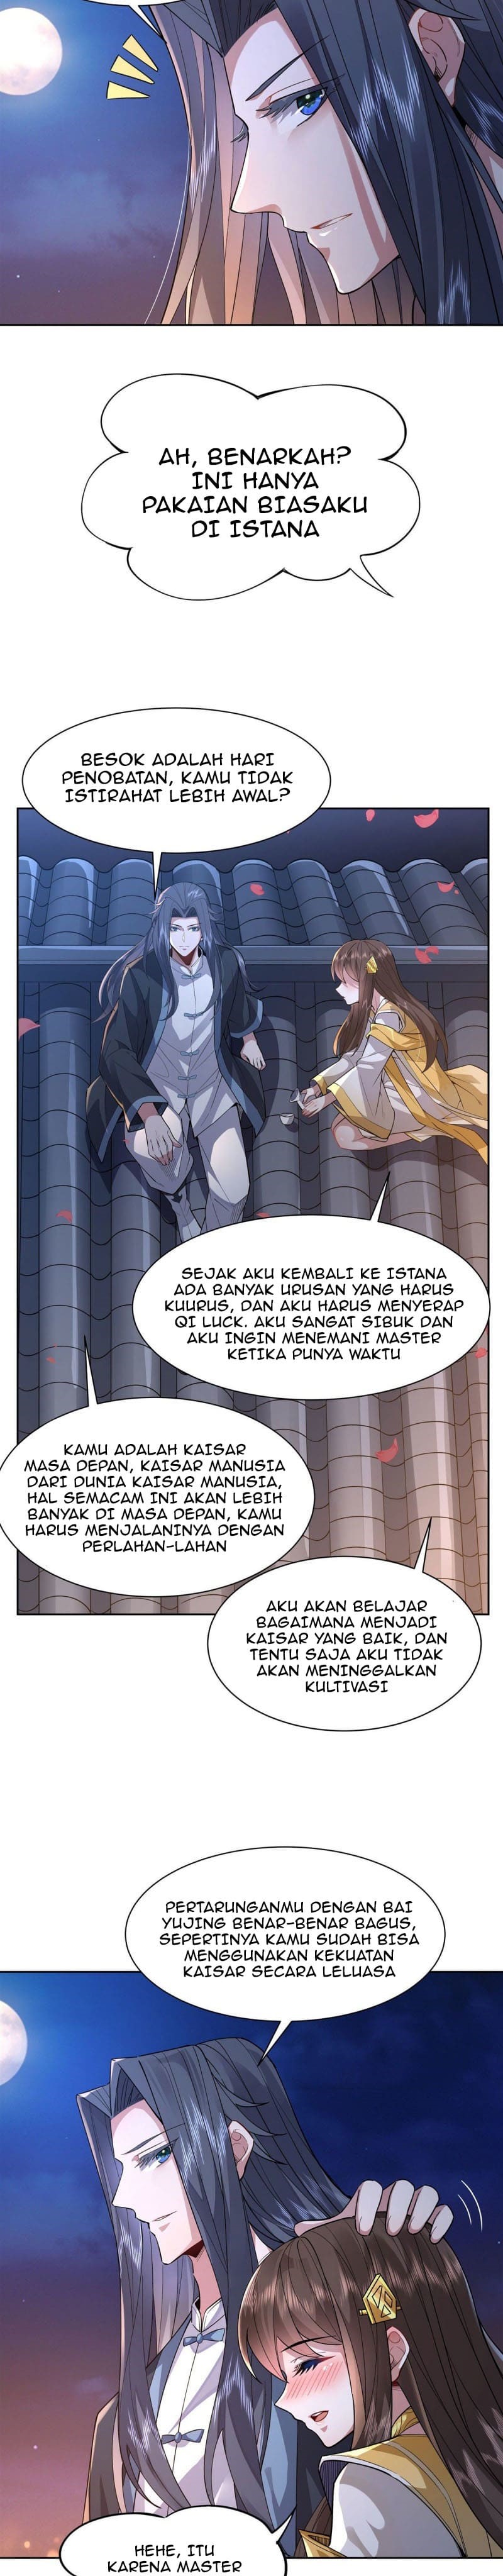 Dilarang COPAS - situs resmi www.mangacanblog.com - Komik my female apprentices are all big shots from the future 036 - chapter 36 37 Indonesia my female apprentices are all big shots from the future 036 - chapter 36 Terbaru 2|Baca Manga Komik Indonesia|Mangacan